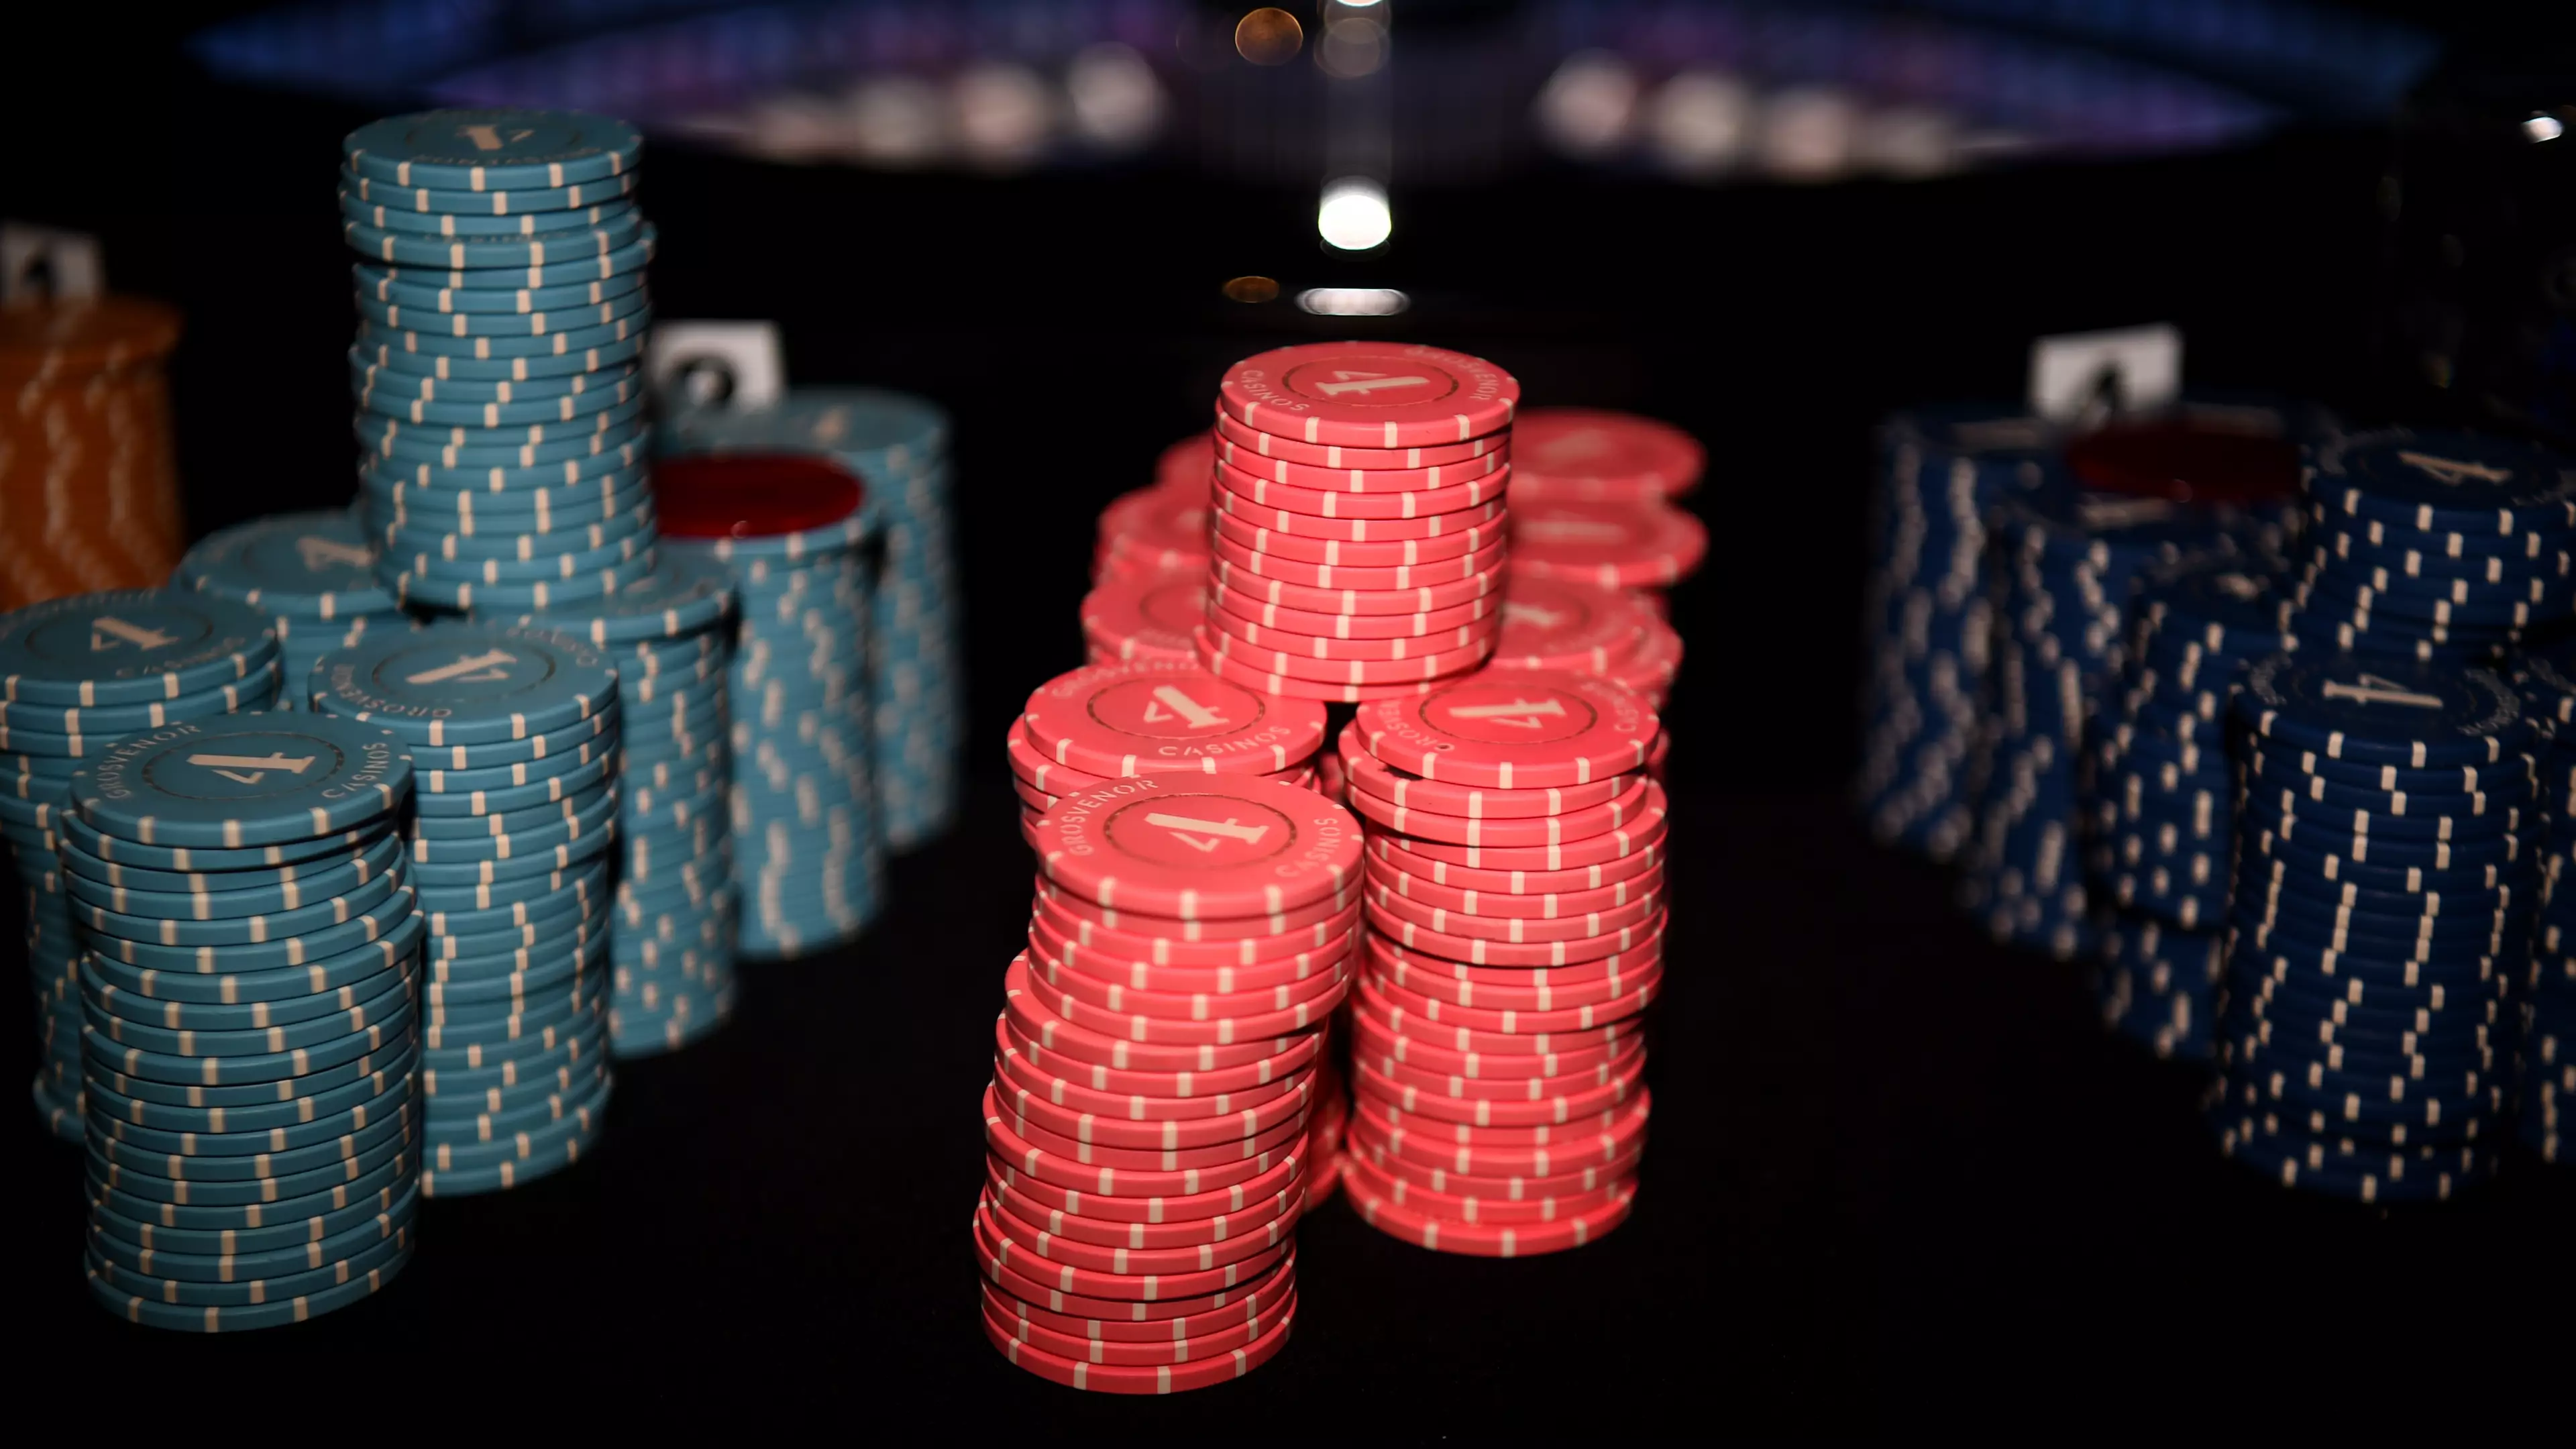 Australian Casinos Lost $14 Million Every Day During Lockdown, New Report Shows